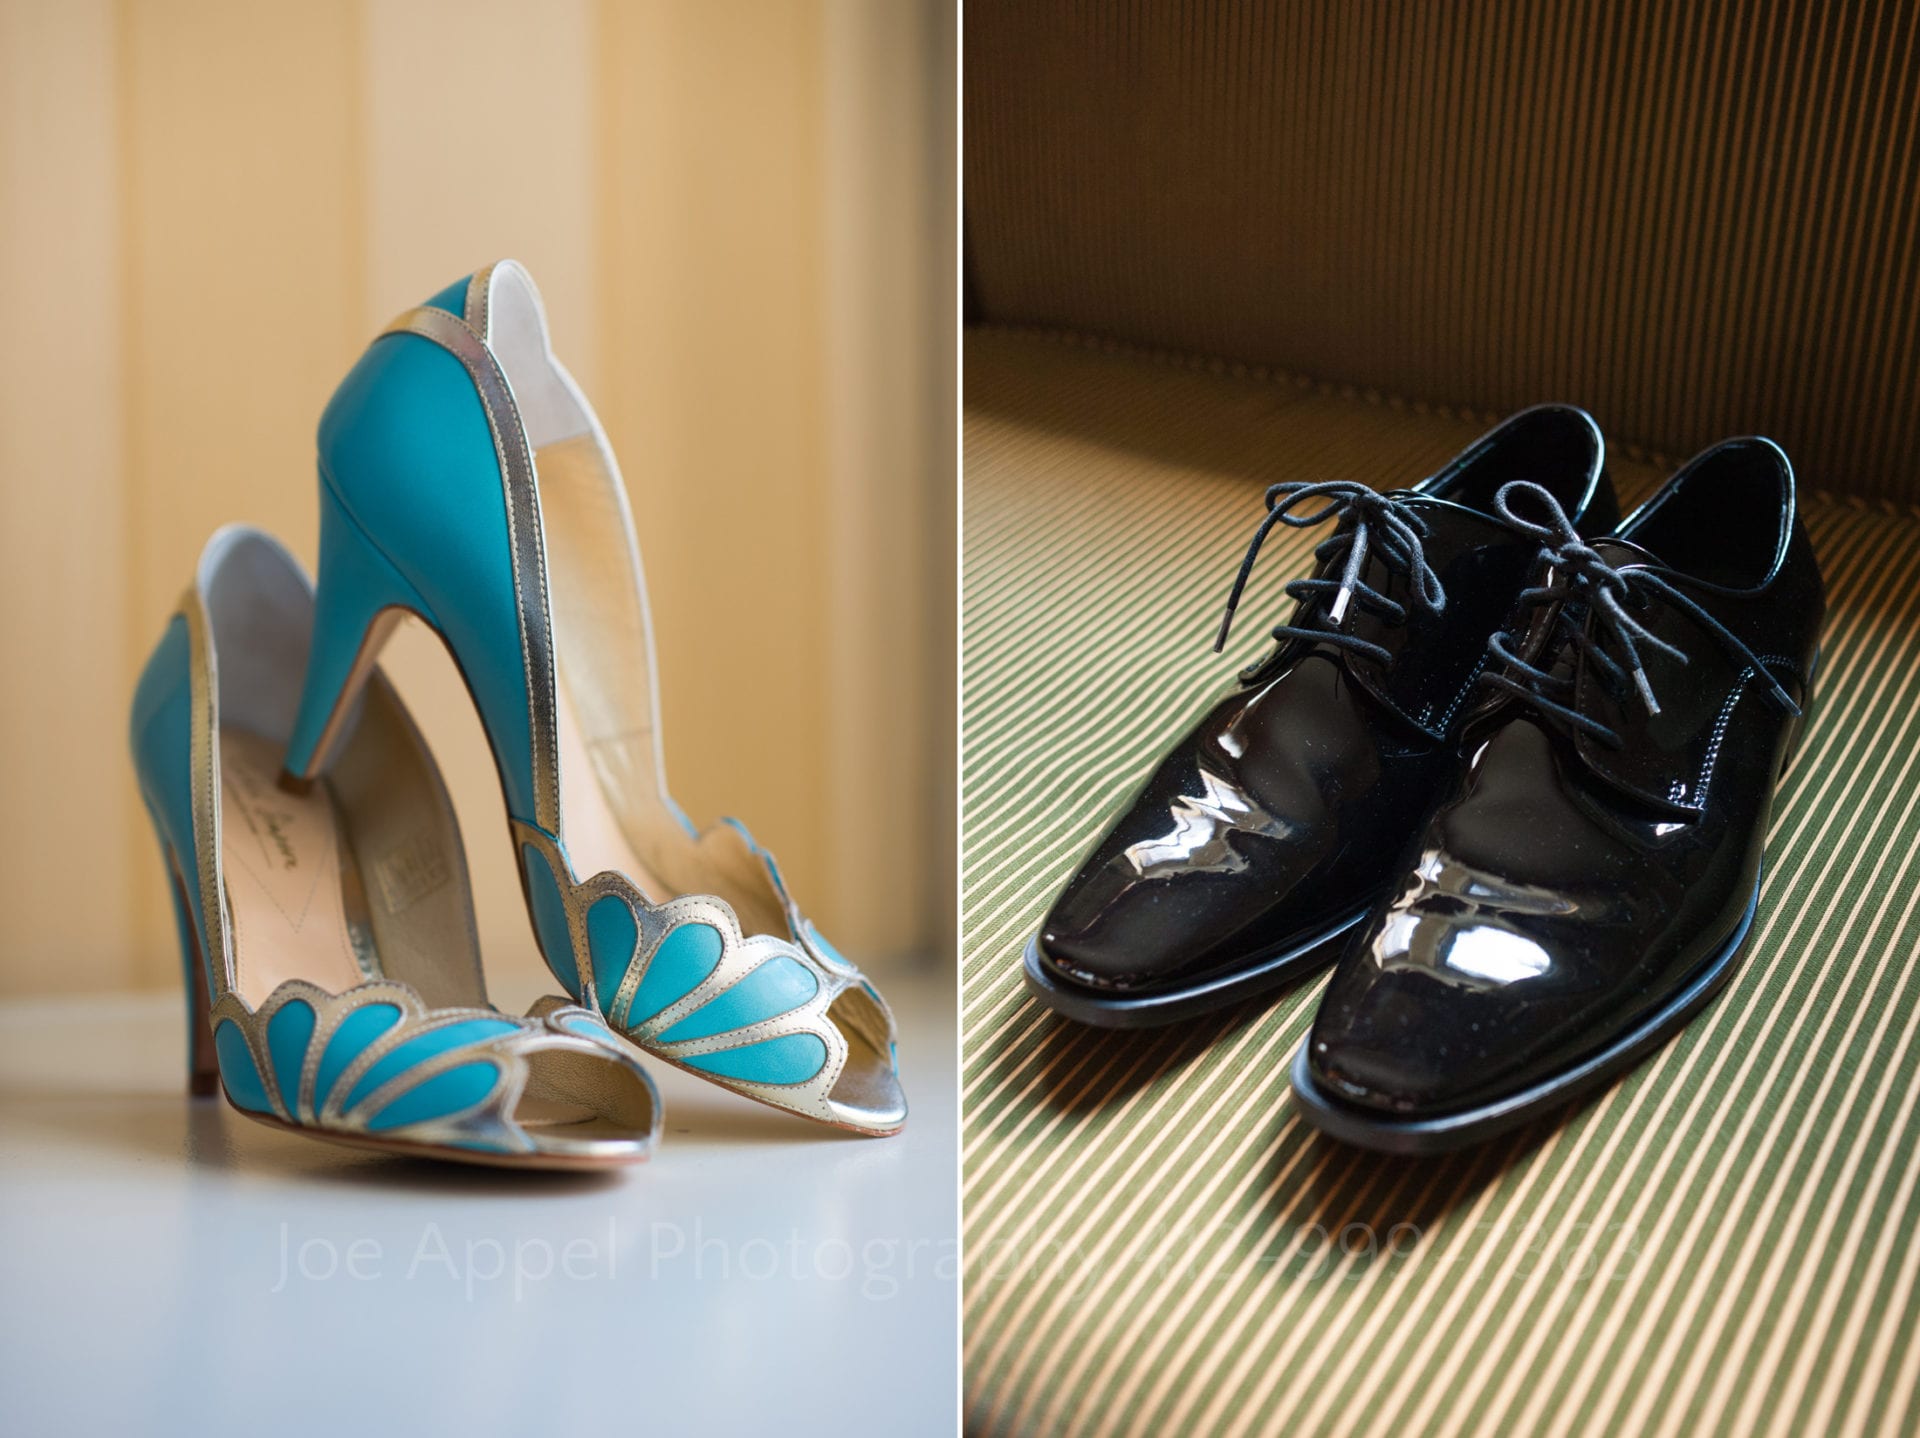 the brides blue and gold heels next to the grooms black dress shoes with blue accents